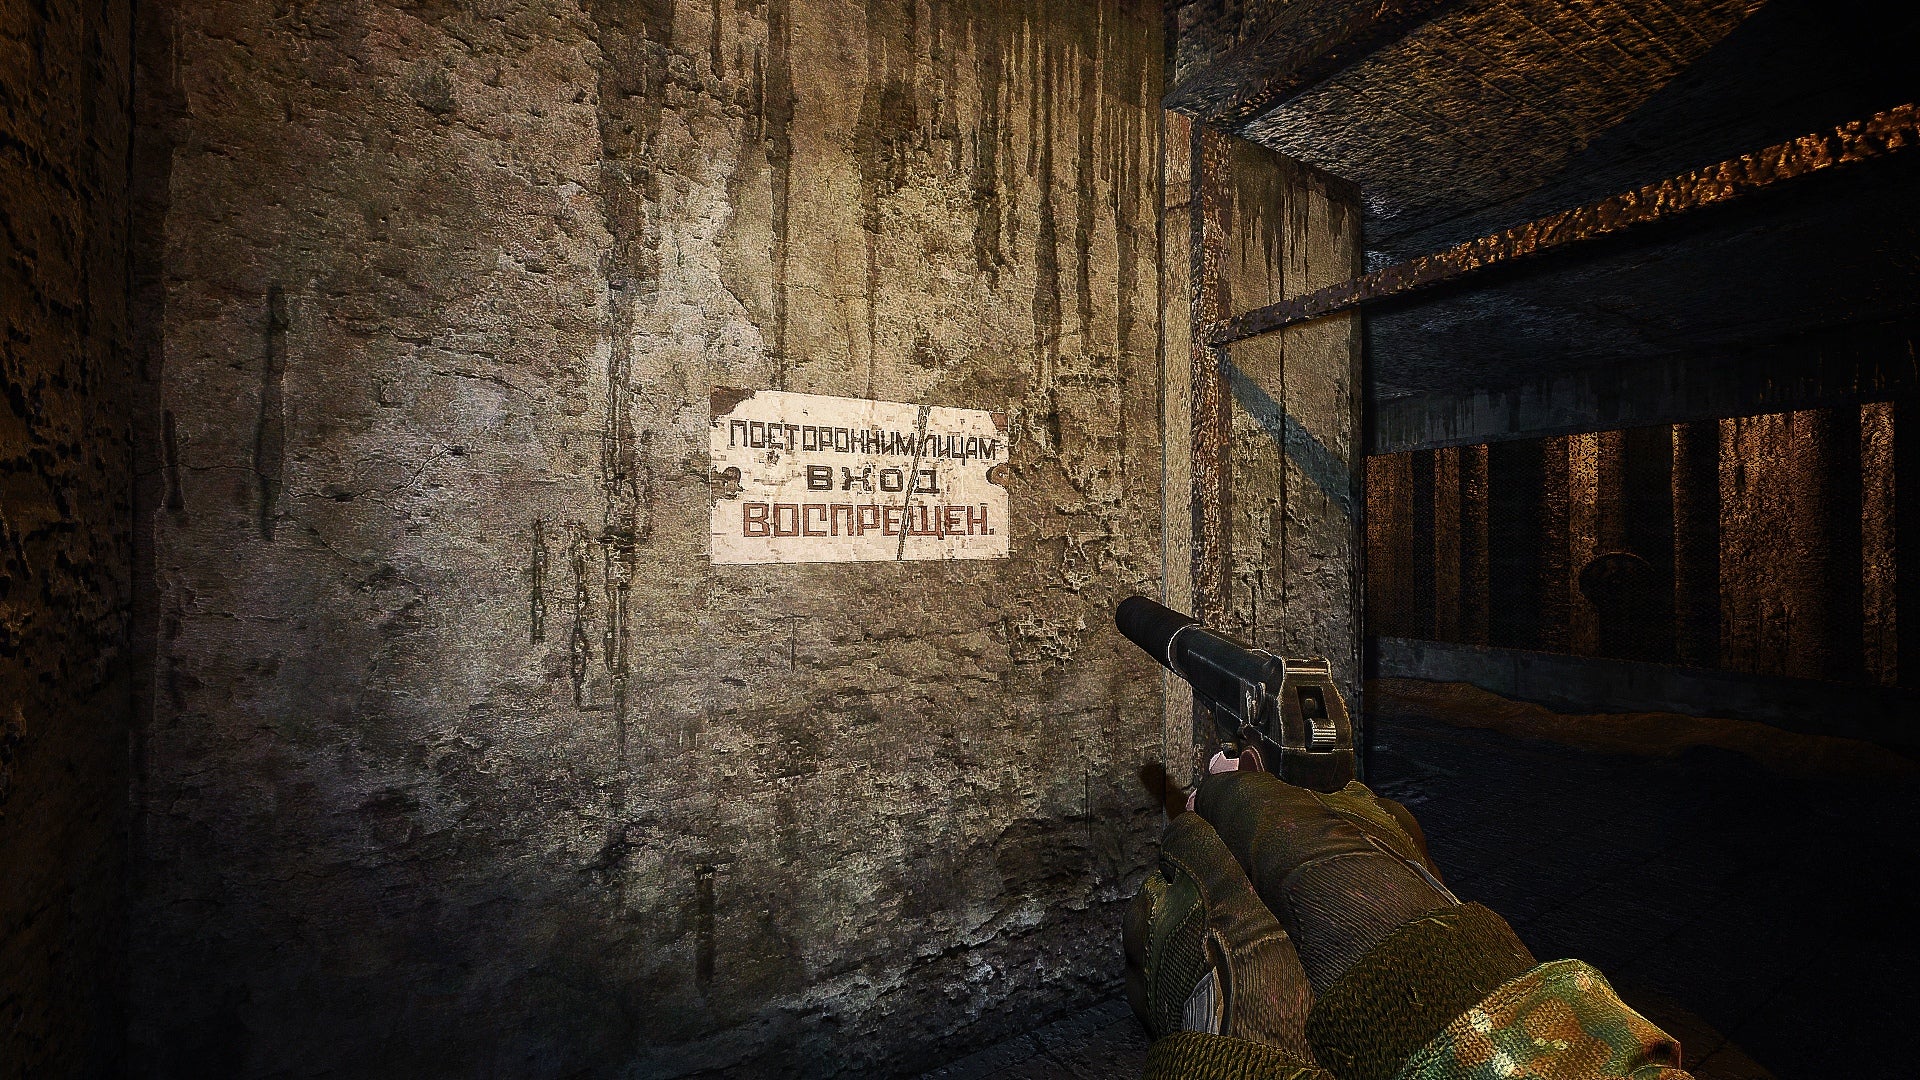 Player holding a pistol looks at a rusted sign in fan made overhaul mod for STALKER: Shadow of Chernobyl.